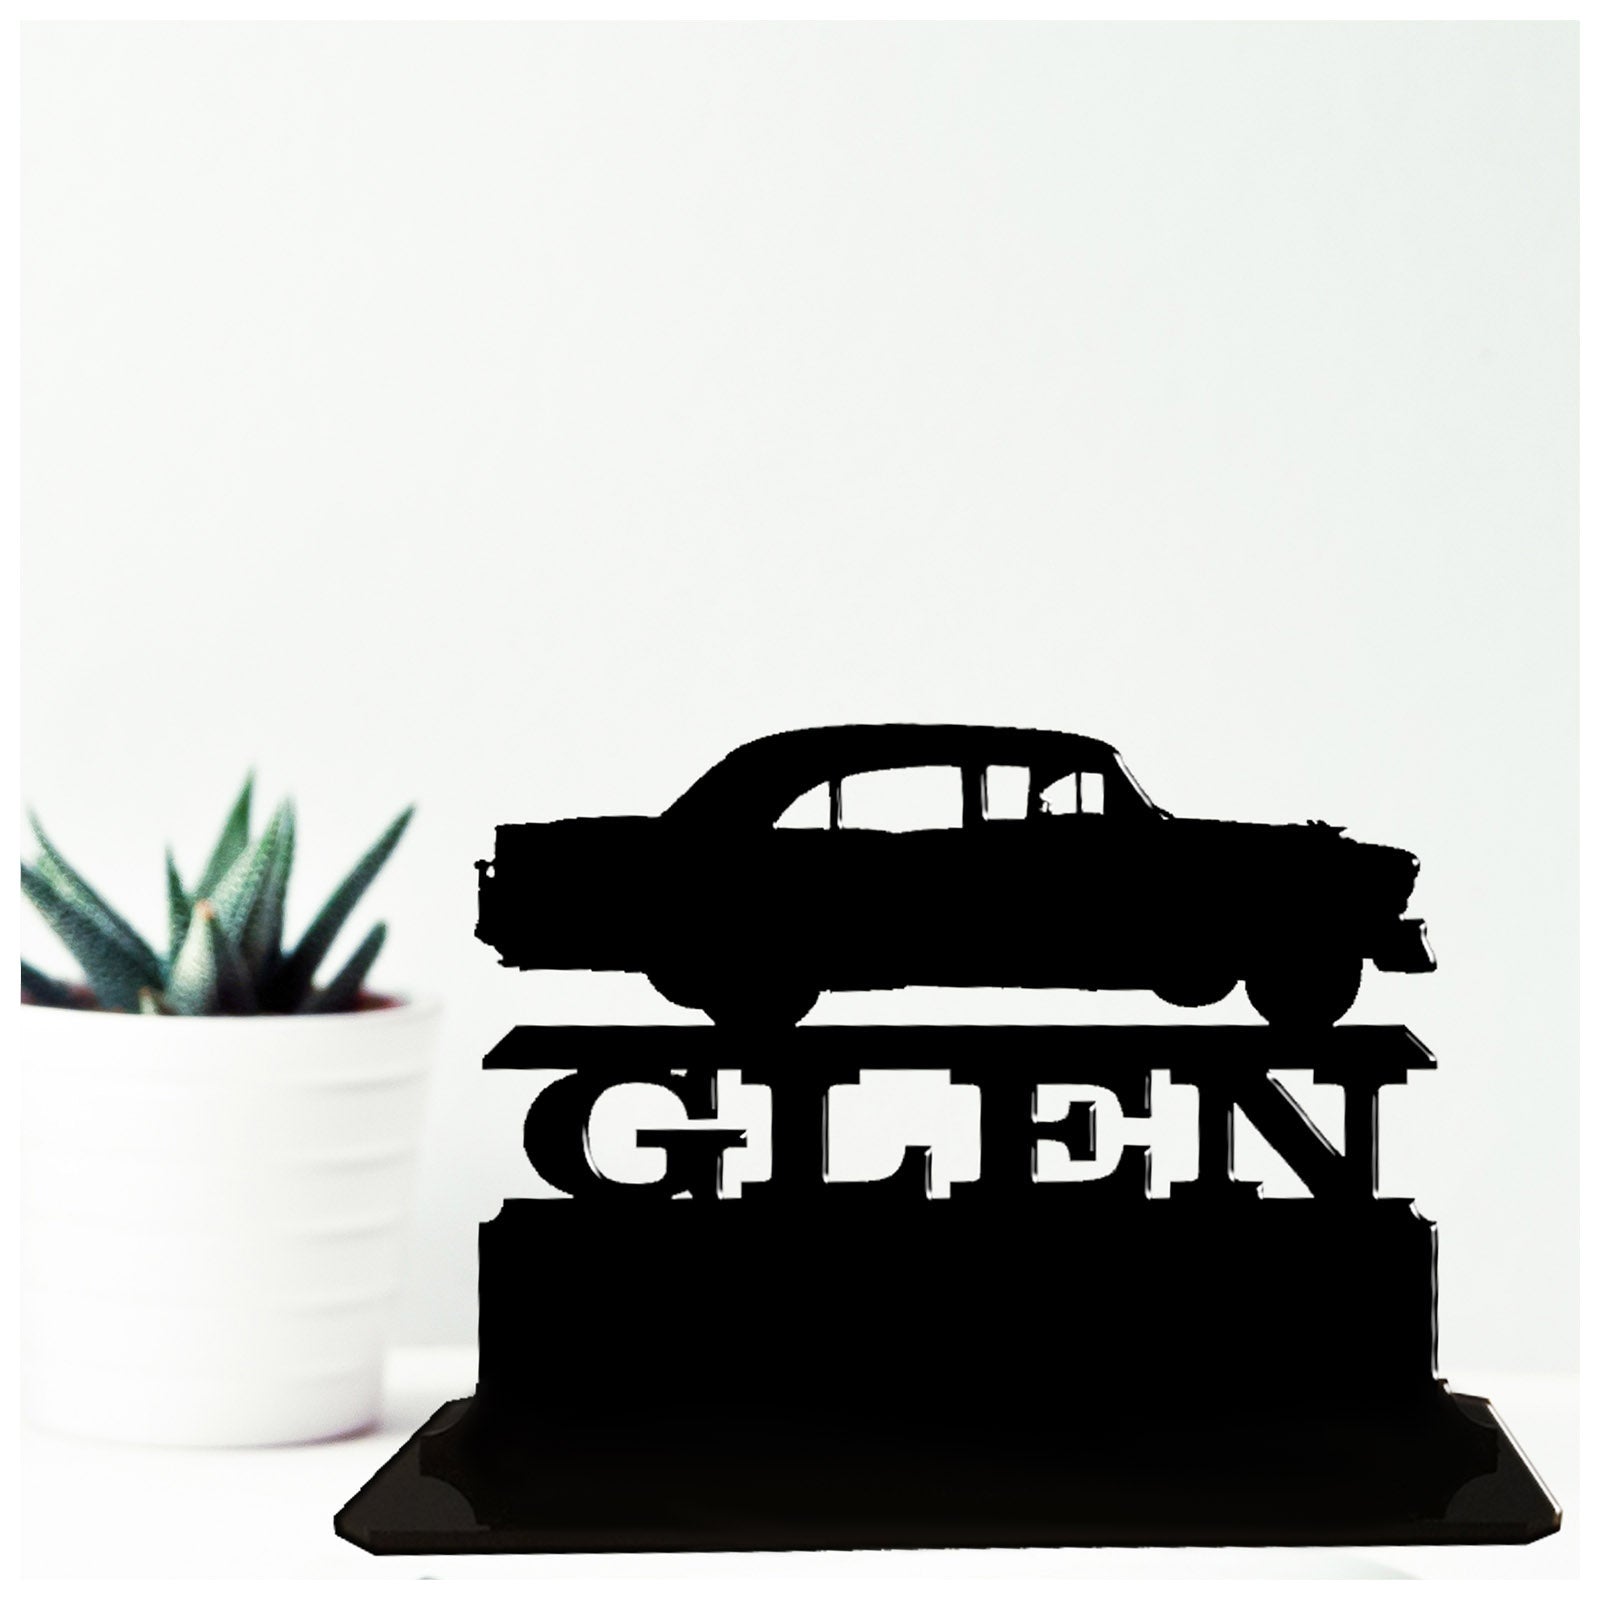 Acrylic personalised 1955 Bel Air gift ideas for vintage car collectors. Standalone keepsake ornaments.